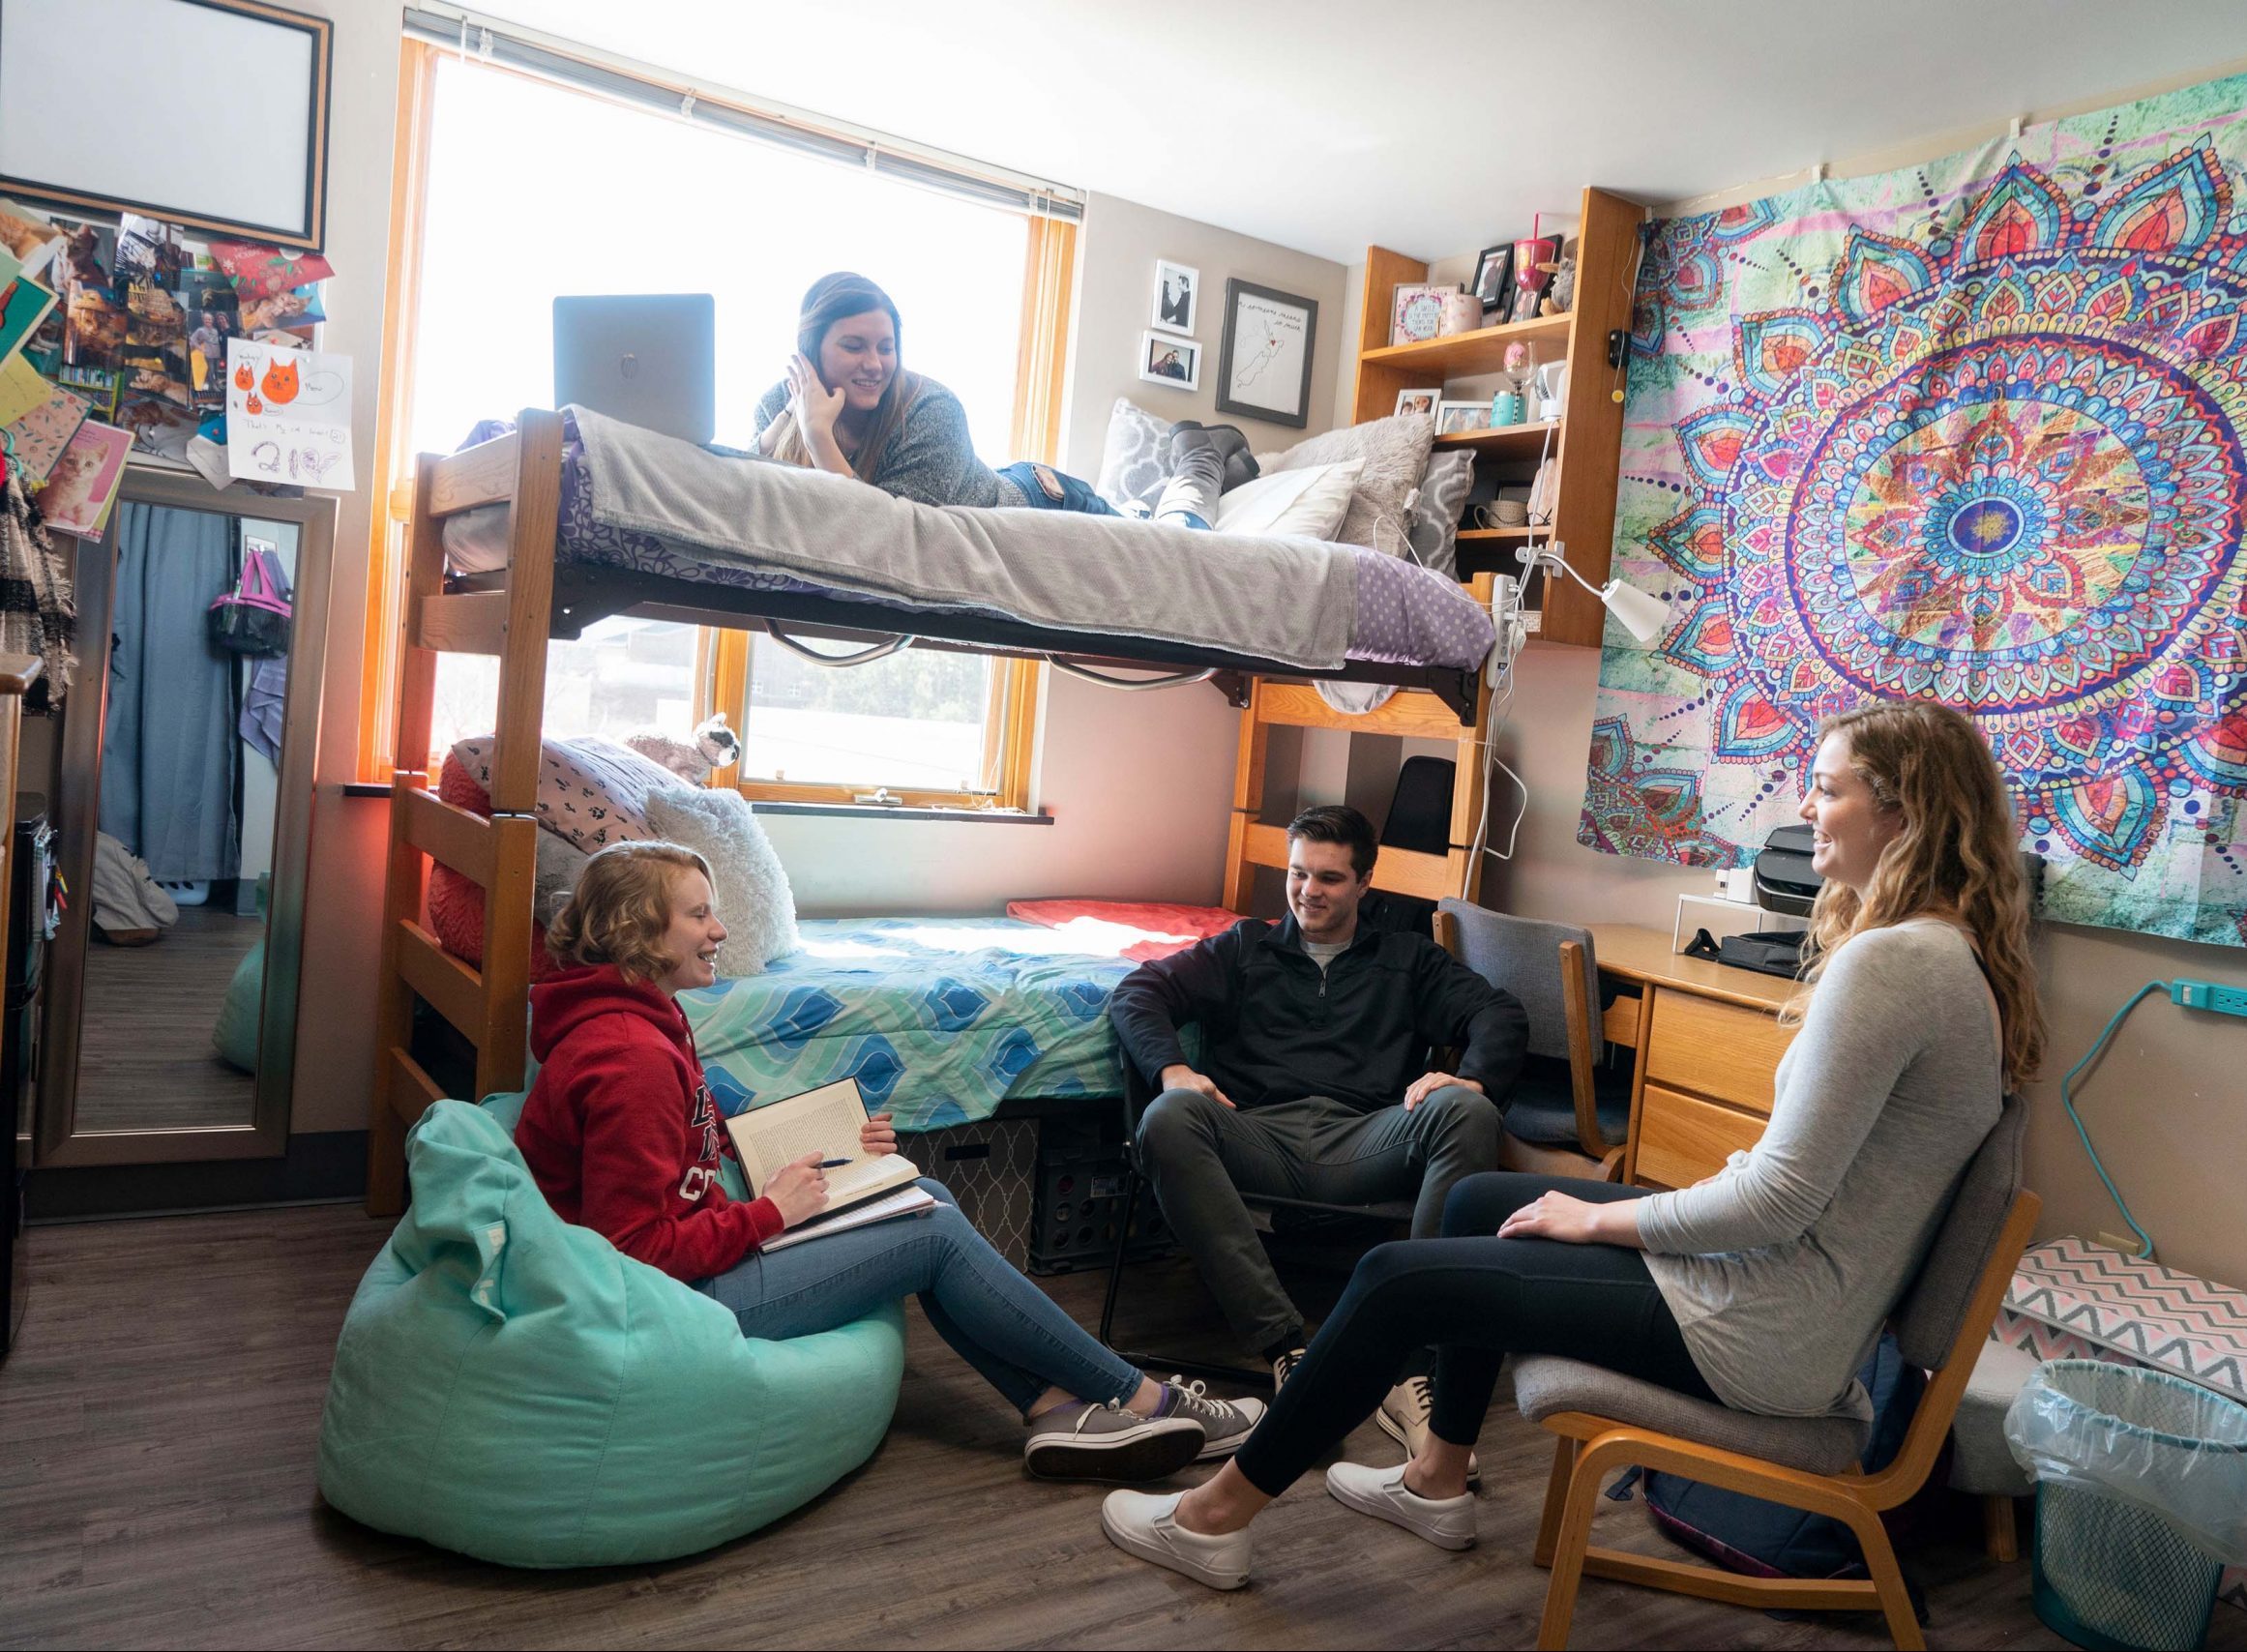 Students chatting in dorm room.